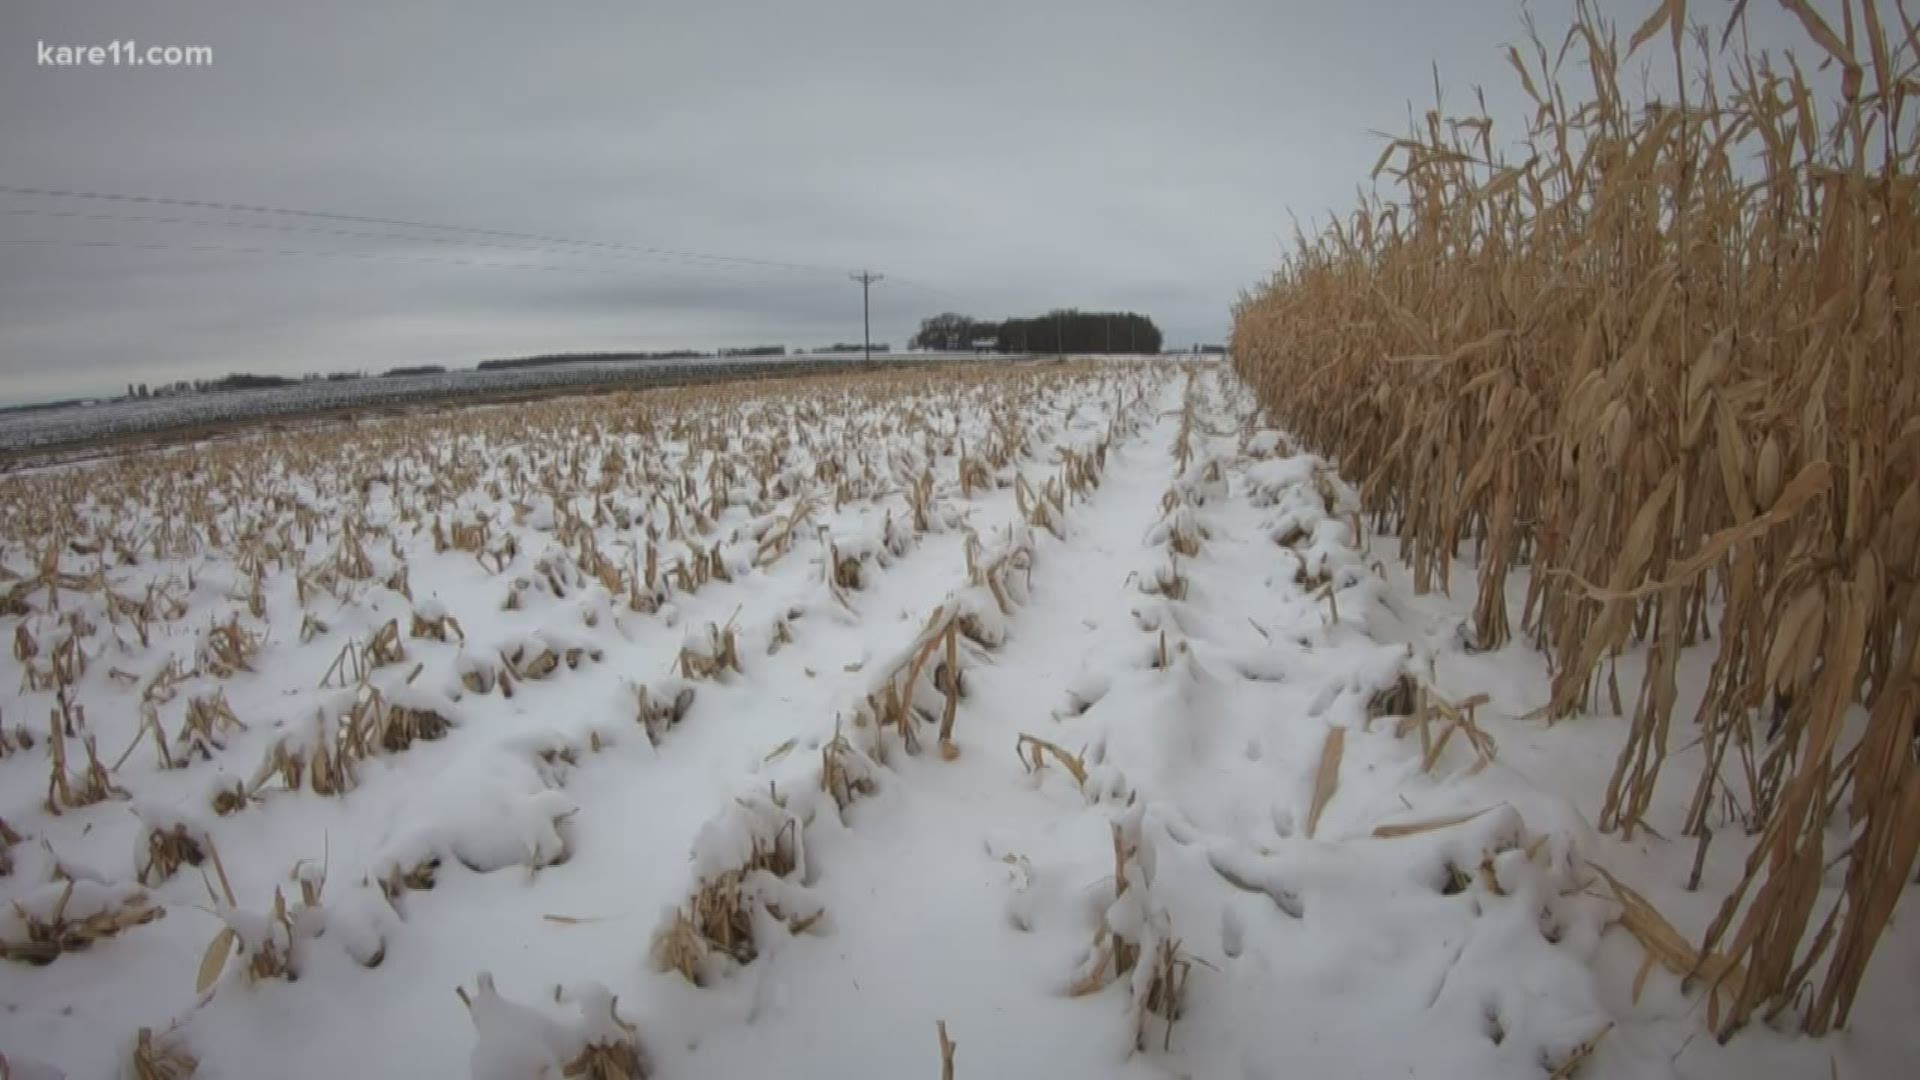 Some farmers were not able to harvest all their crops before this weeks snowstorm.